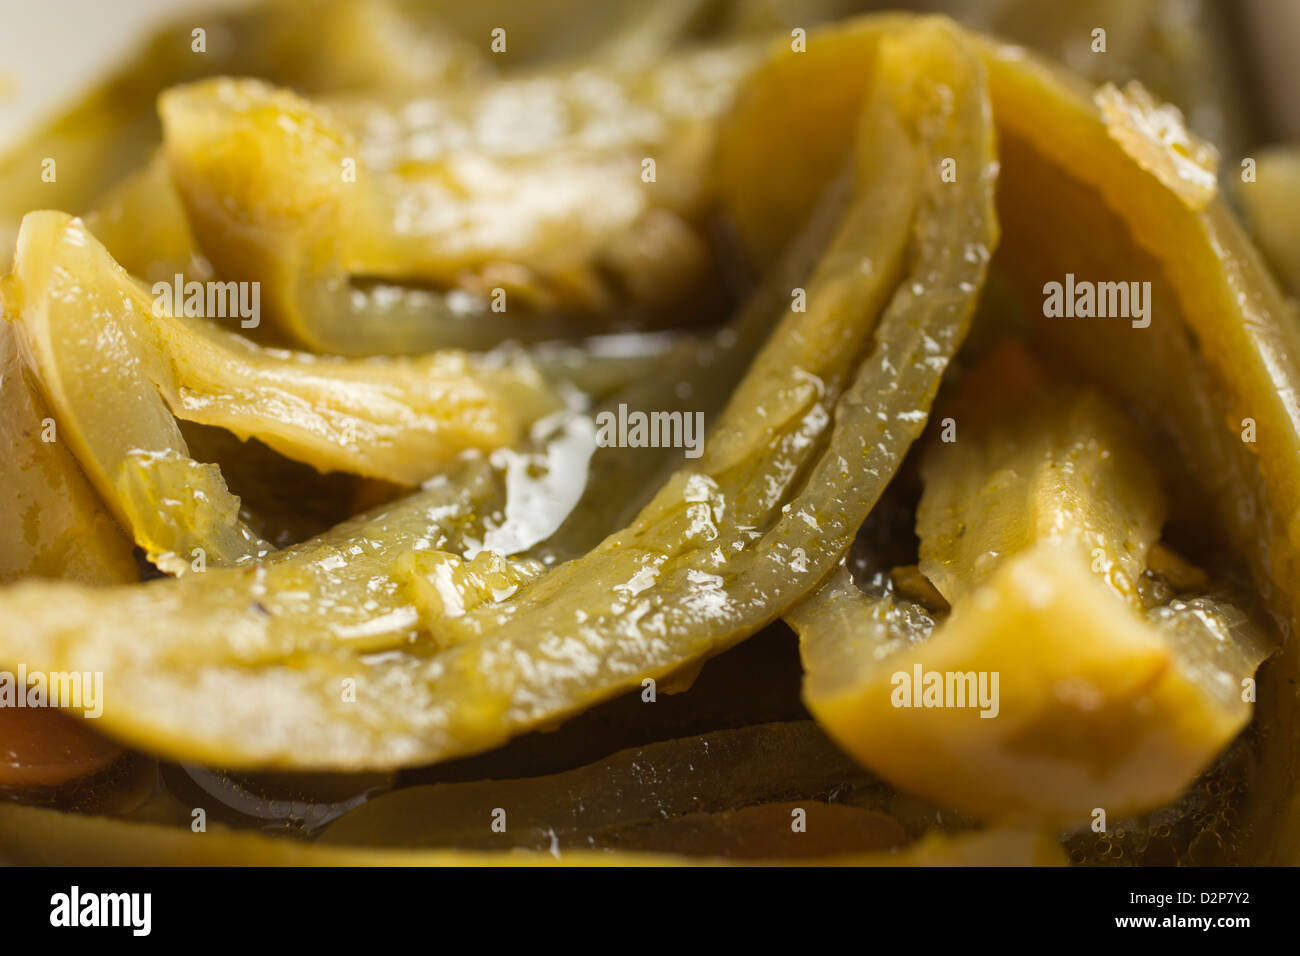 pickled jalapeño peppers Stock Photo